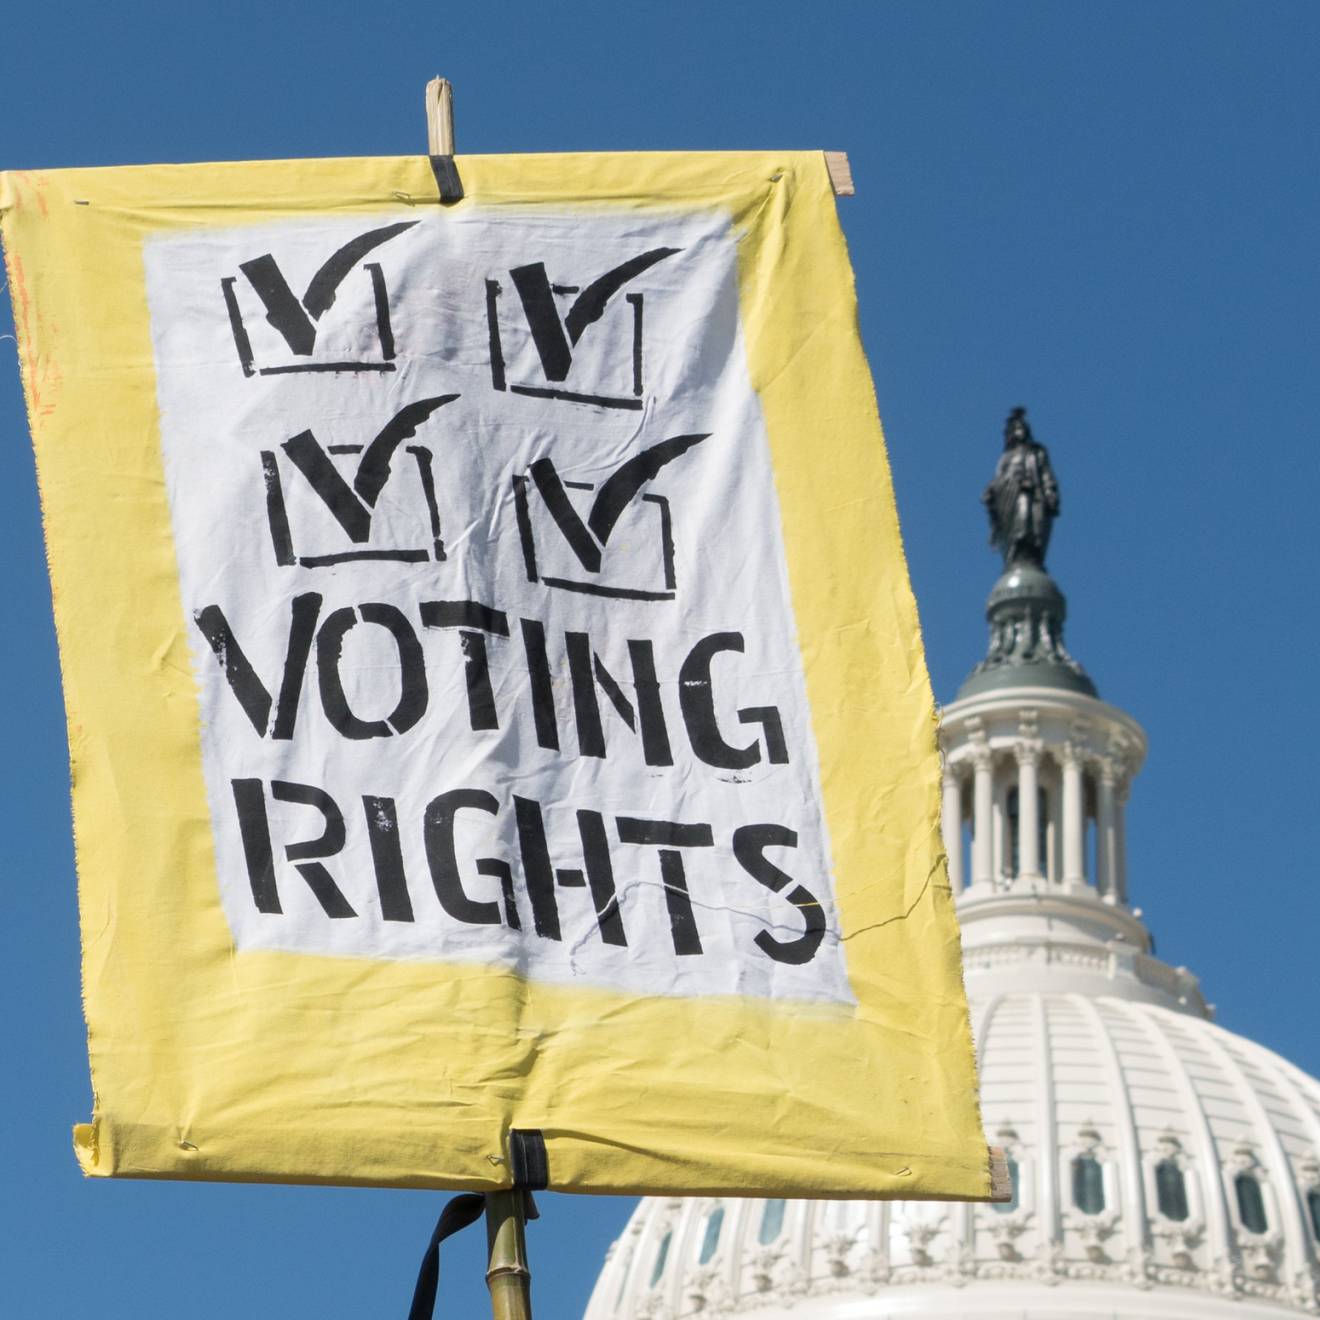 A voting rights sign held up in front of the U.S. Capitol